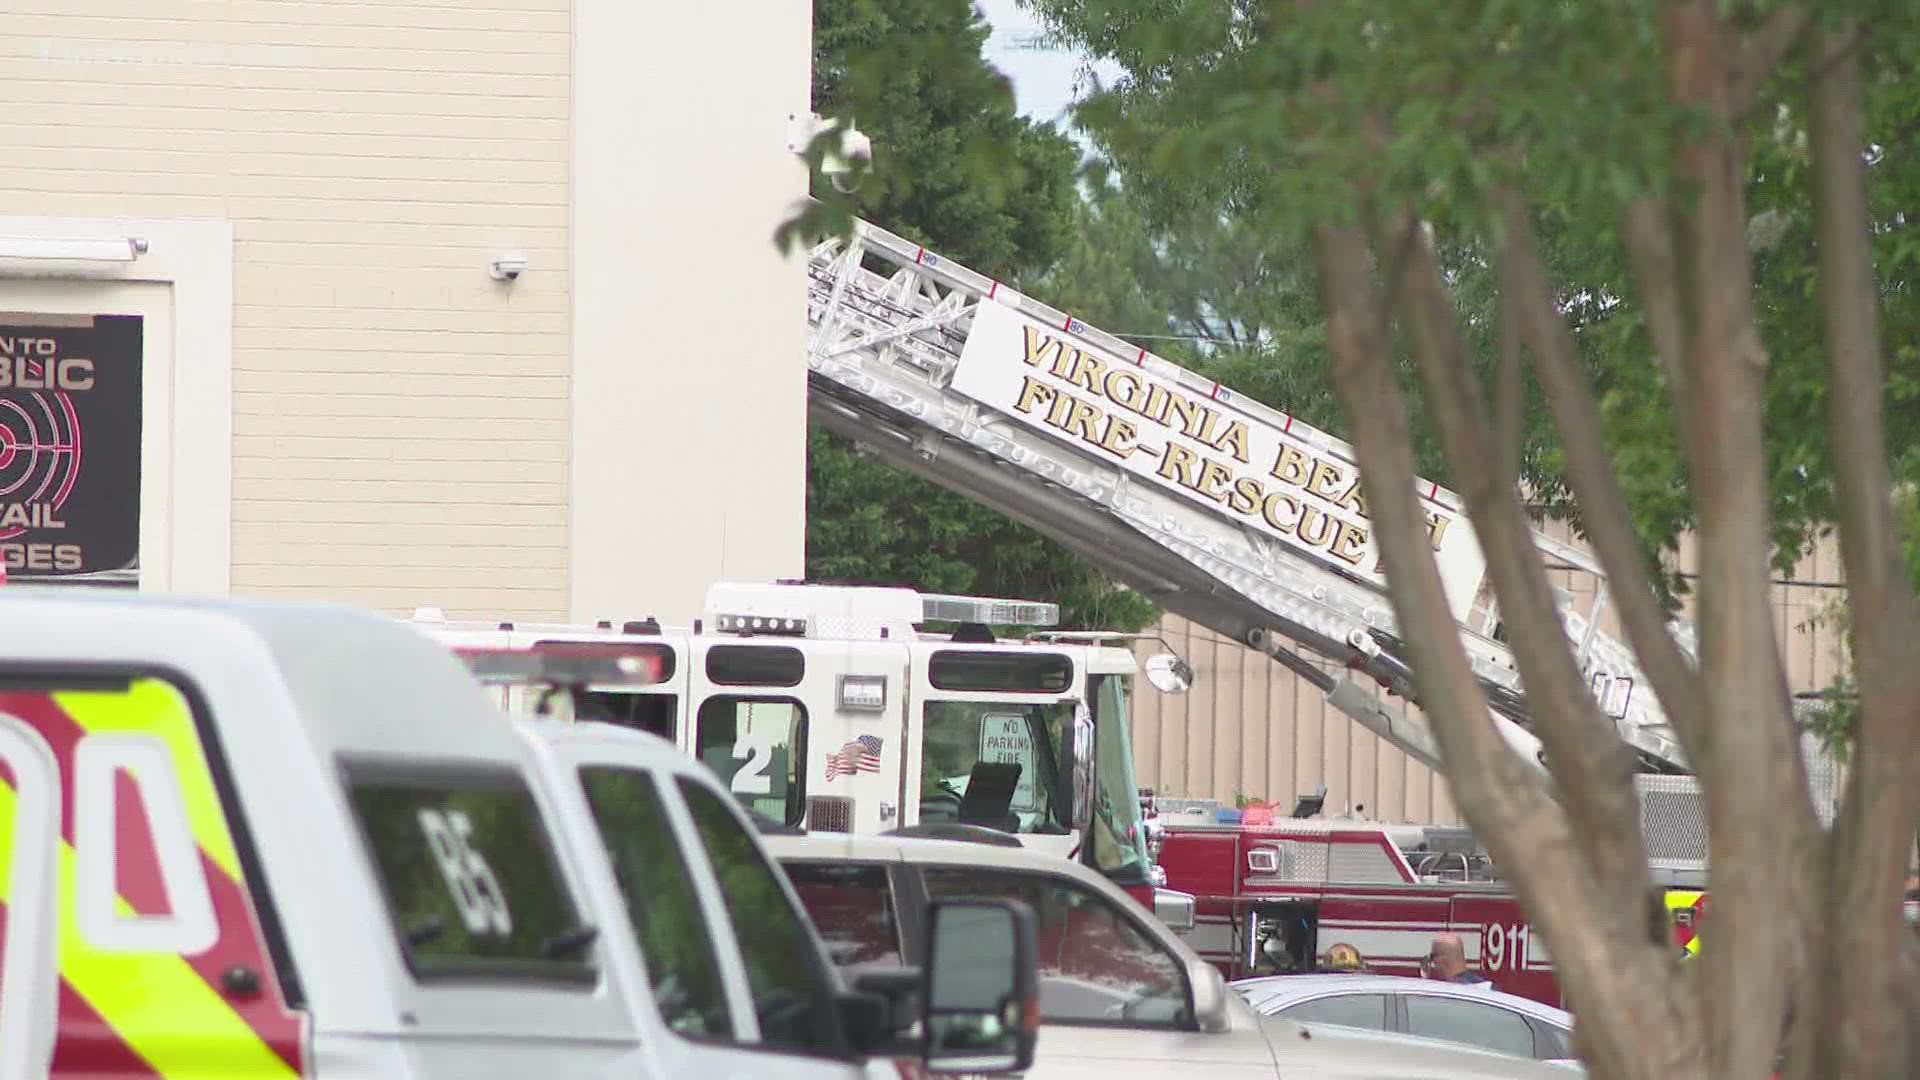 Firefighters found heavy smoke and that a fire had started in the ventilation system and traveled up to the roof.